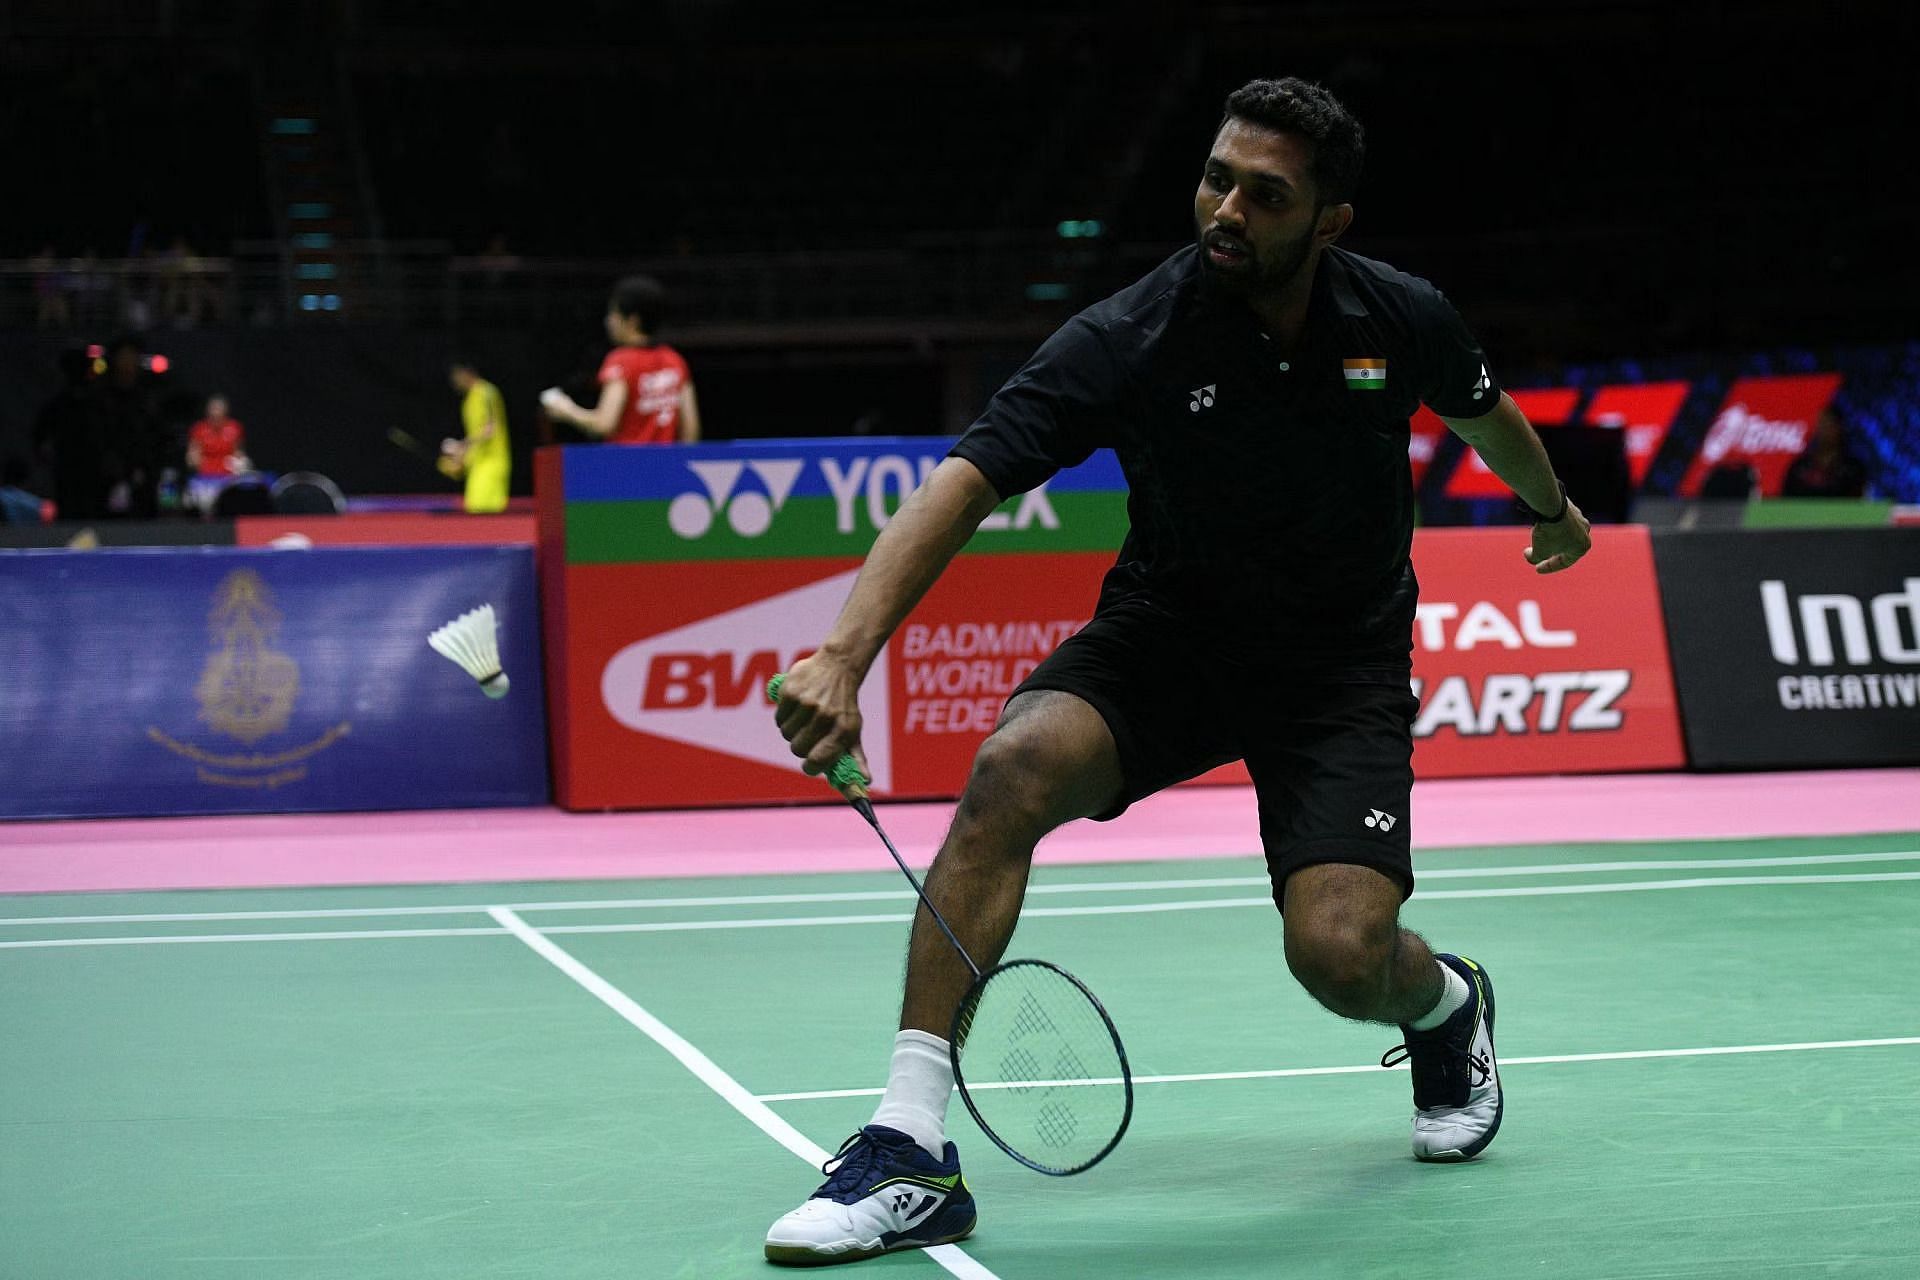 Prannoy takes a hard fought victory against Kidambi 